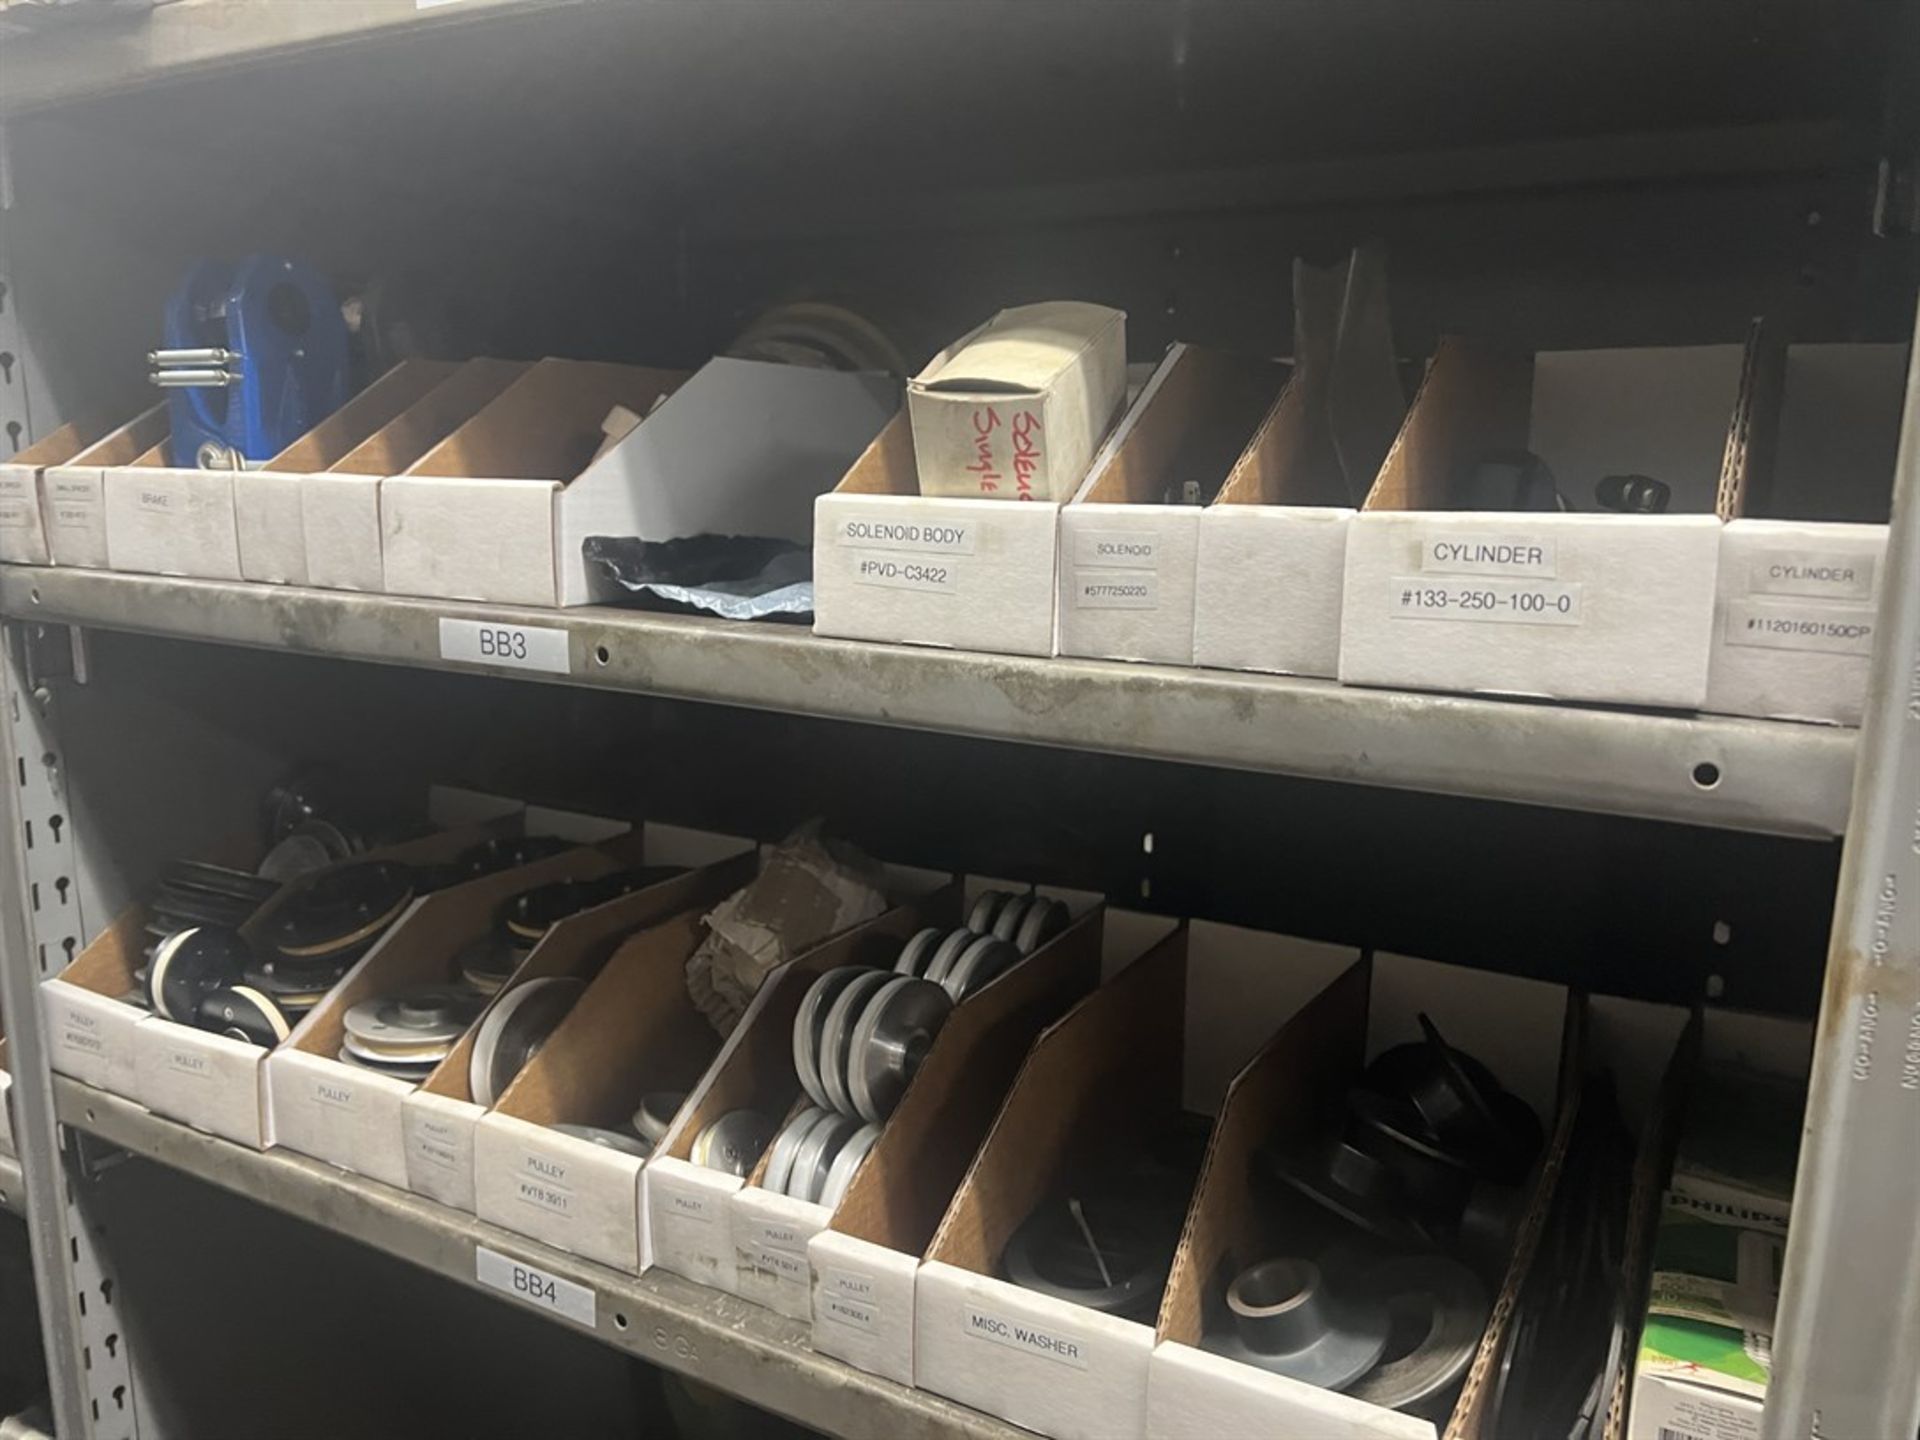 Maintenance Crib- Row of Shop Shelving w/ Contents Including Sprocket, Grippers, Pistons, Mounting - Image 11 of 15